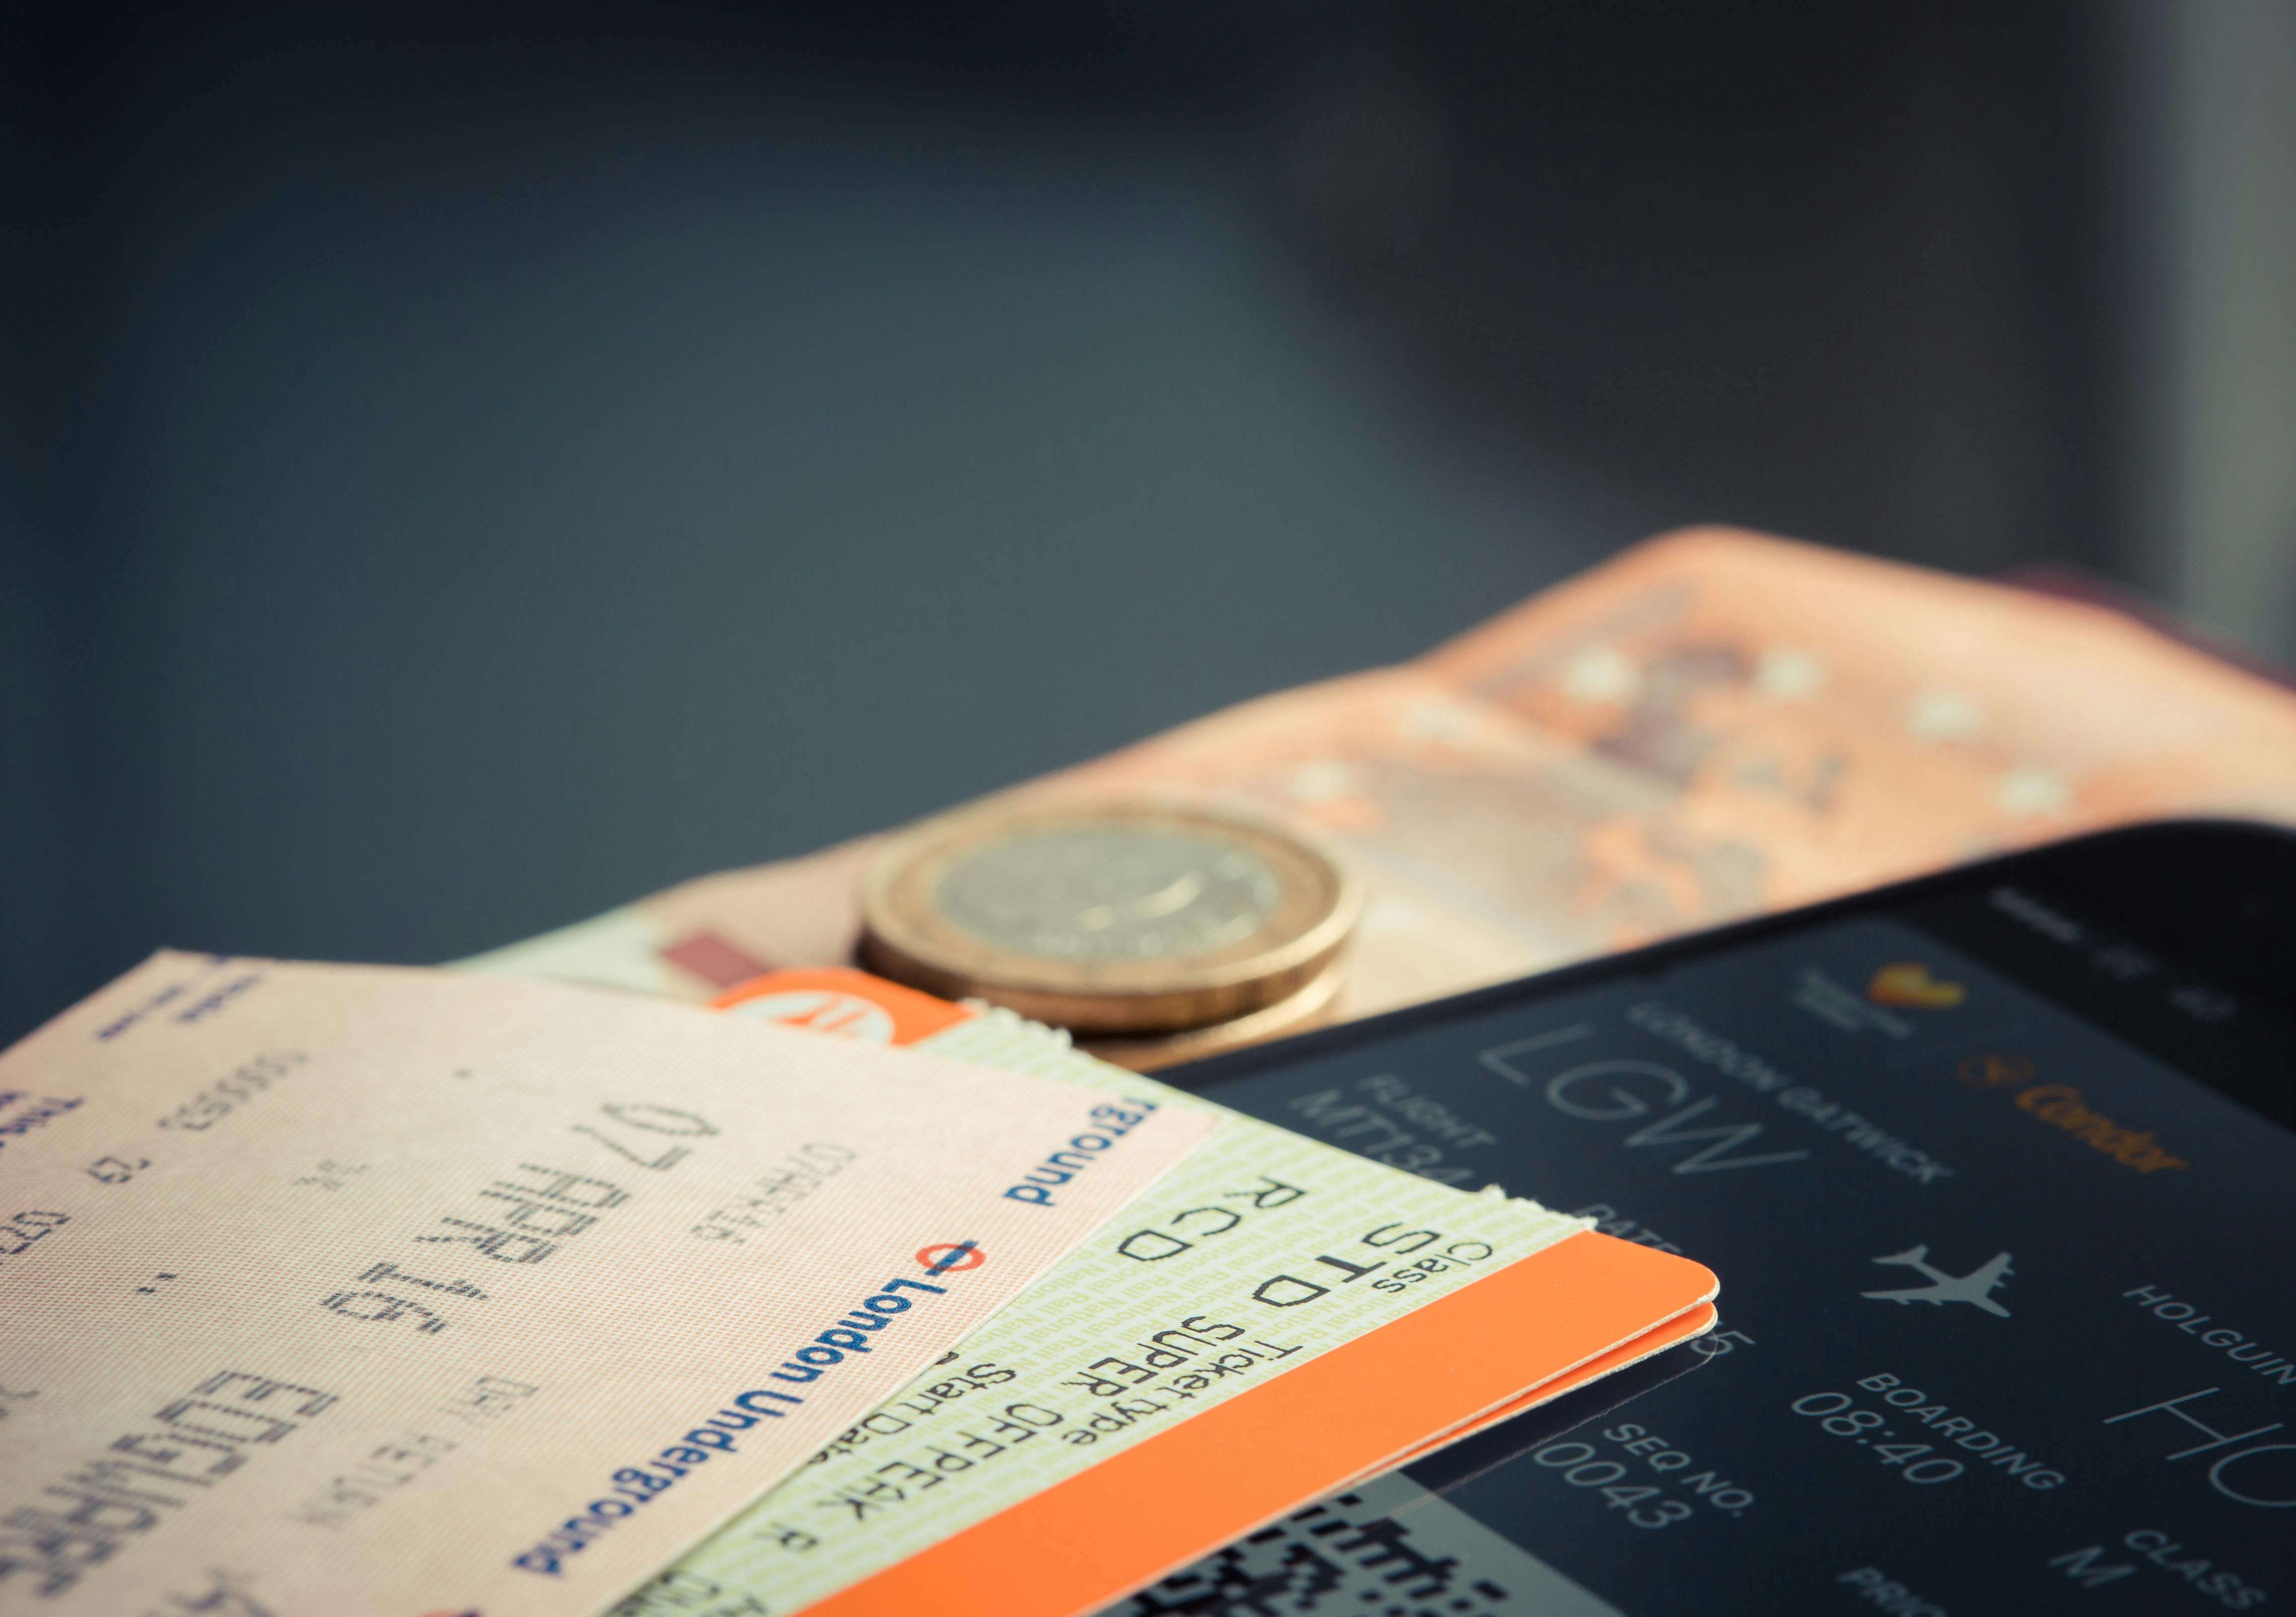 Airline tickets on a table with money | Source: Pexels